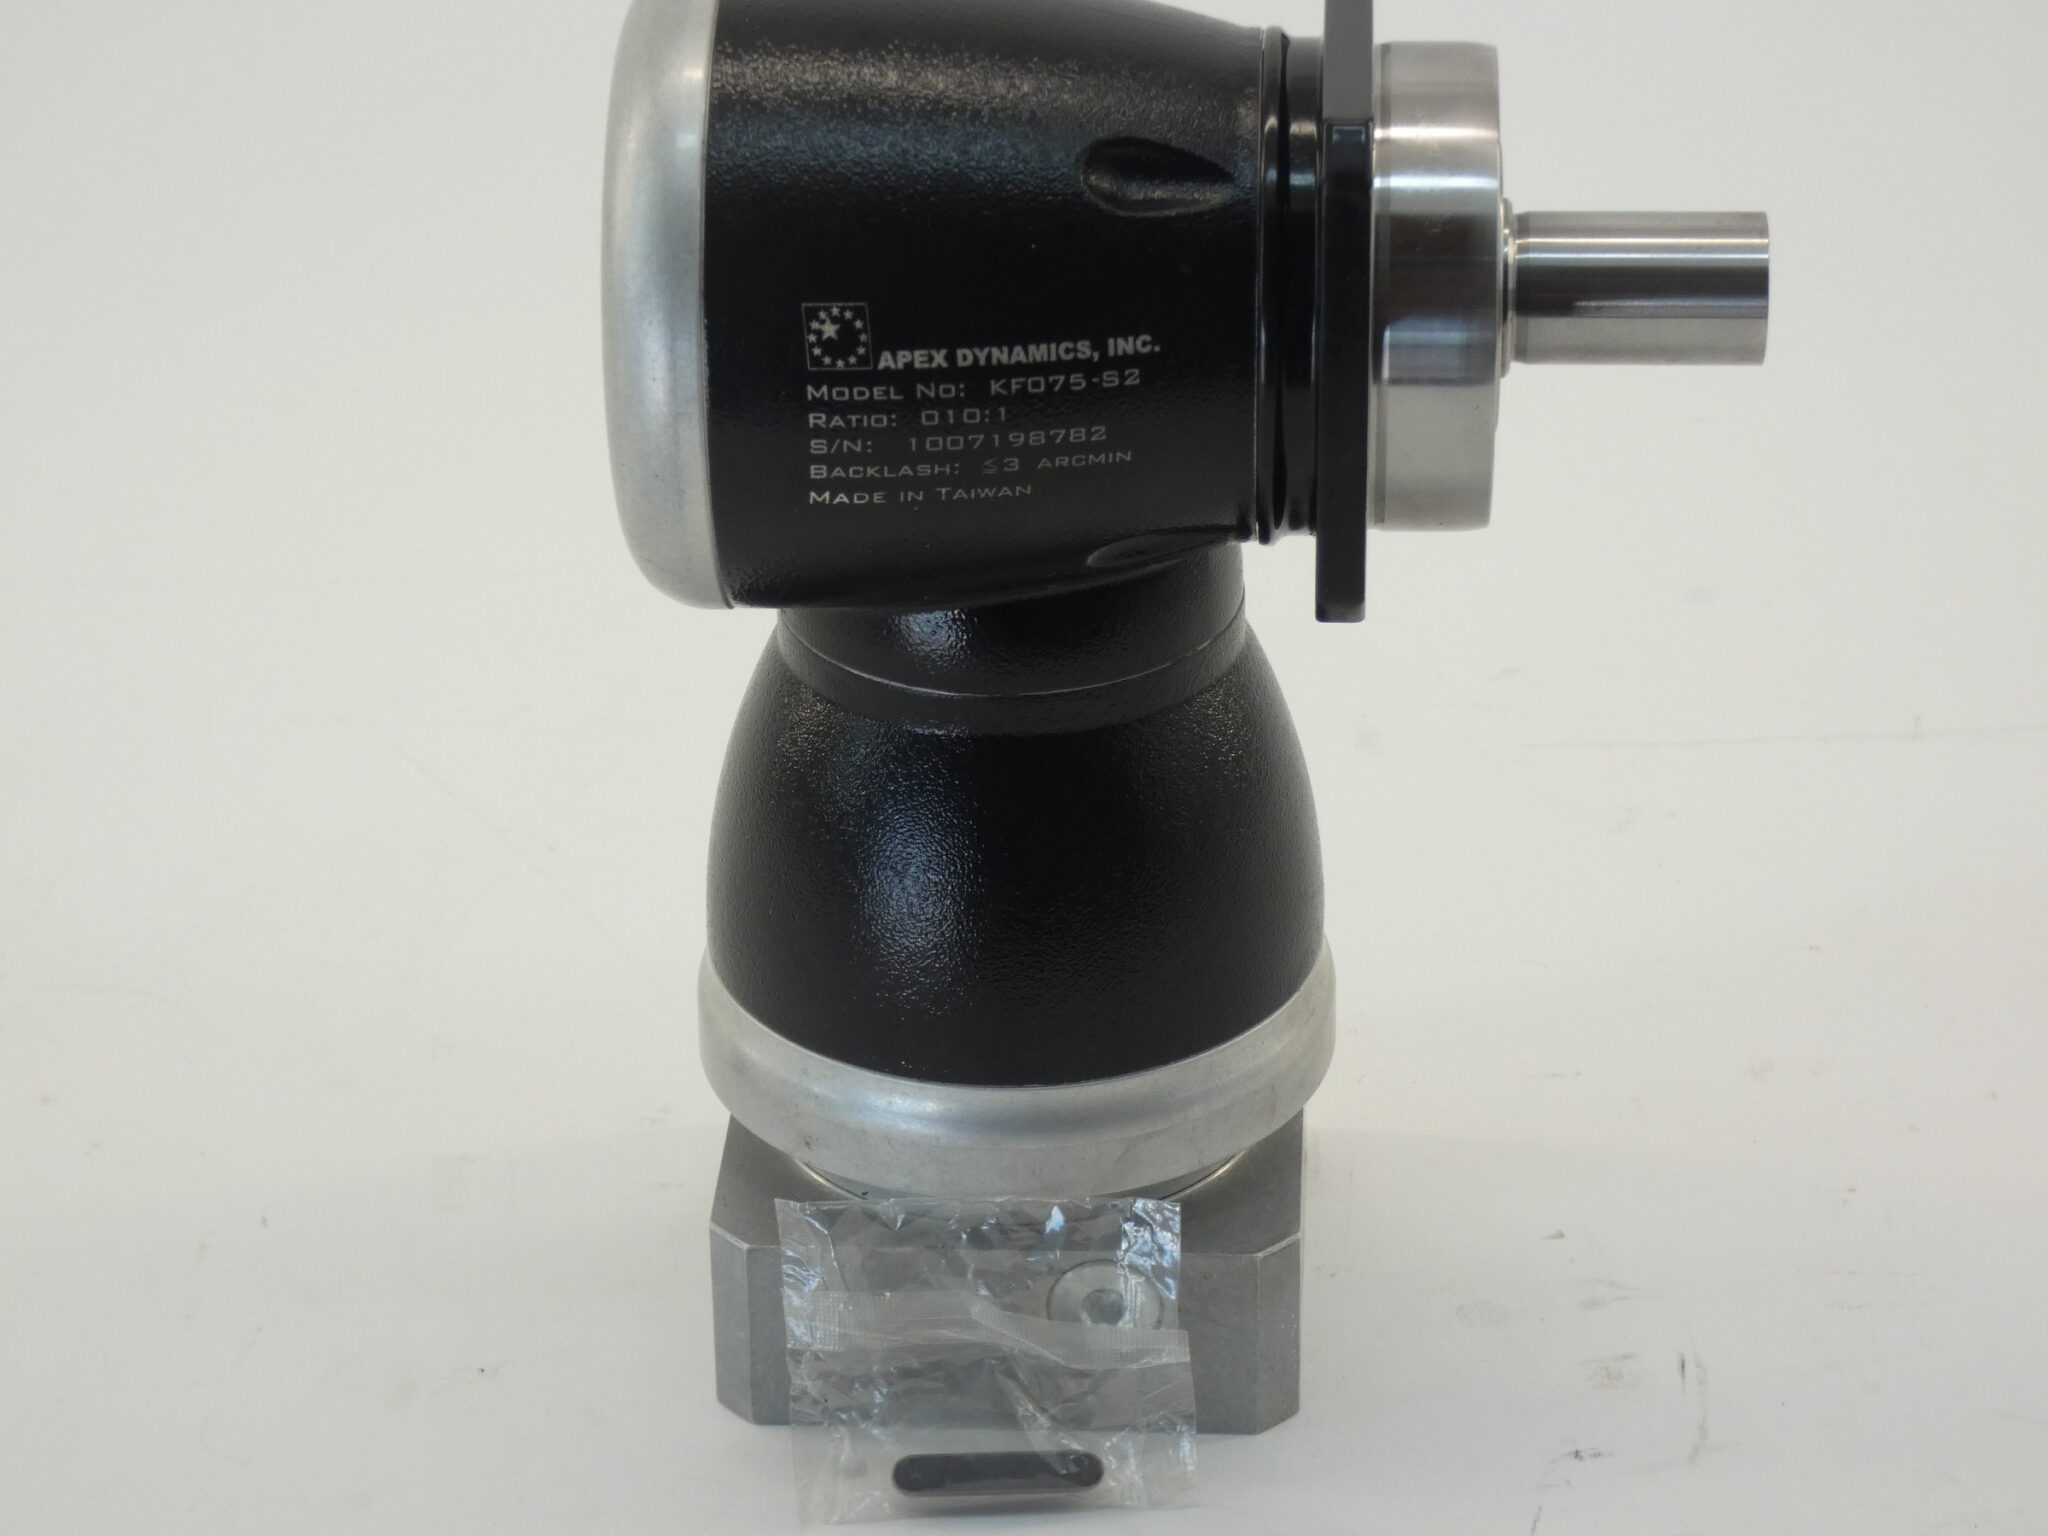 AFR075-S-91-P2 Planetary Gear Box Details about   Apex Dynamics Model Unused Old Stock < 